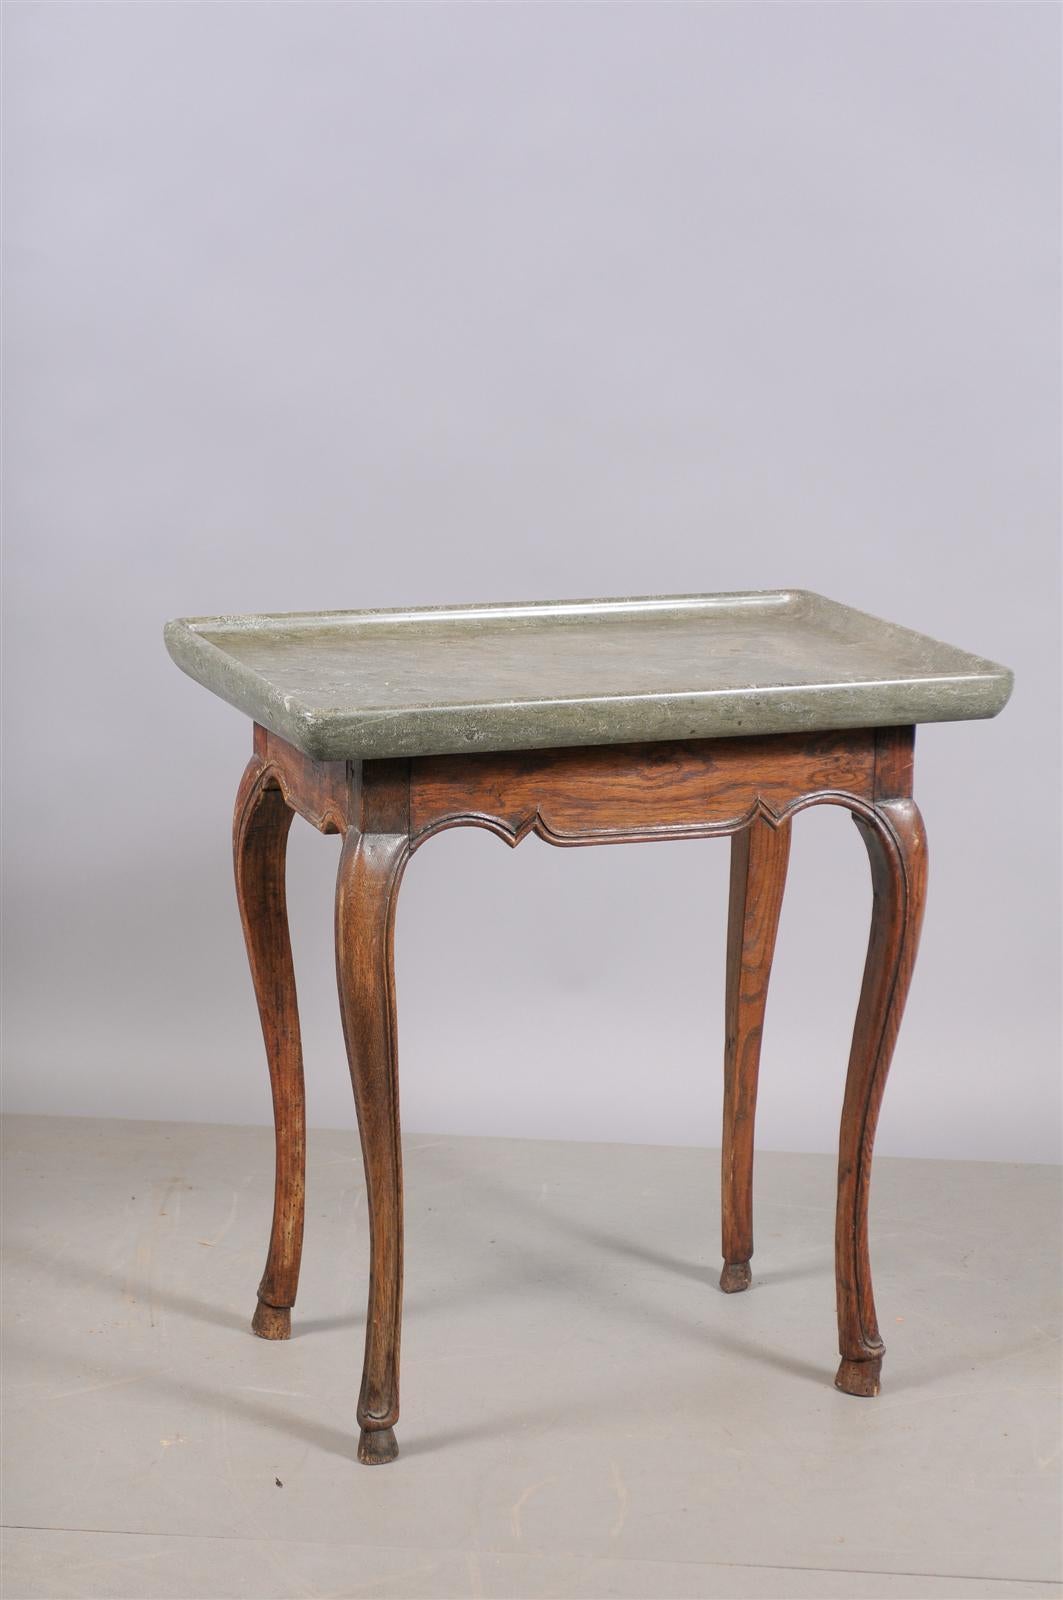 Swedish oak table with thick dish stone to, shaped apron and hoofed feet. 

William Word Fine Antiques: Atlanta's source for antique interiors since 1956.